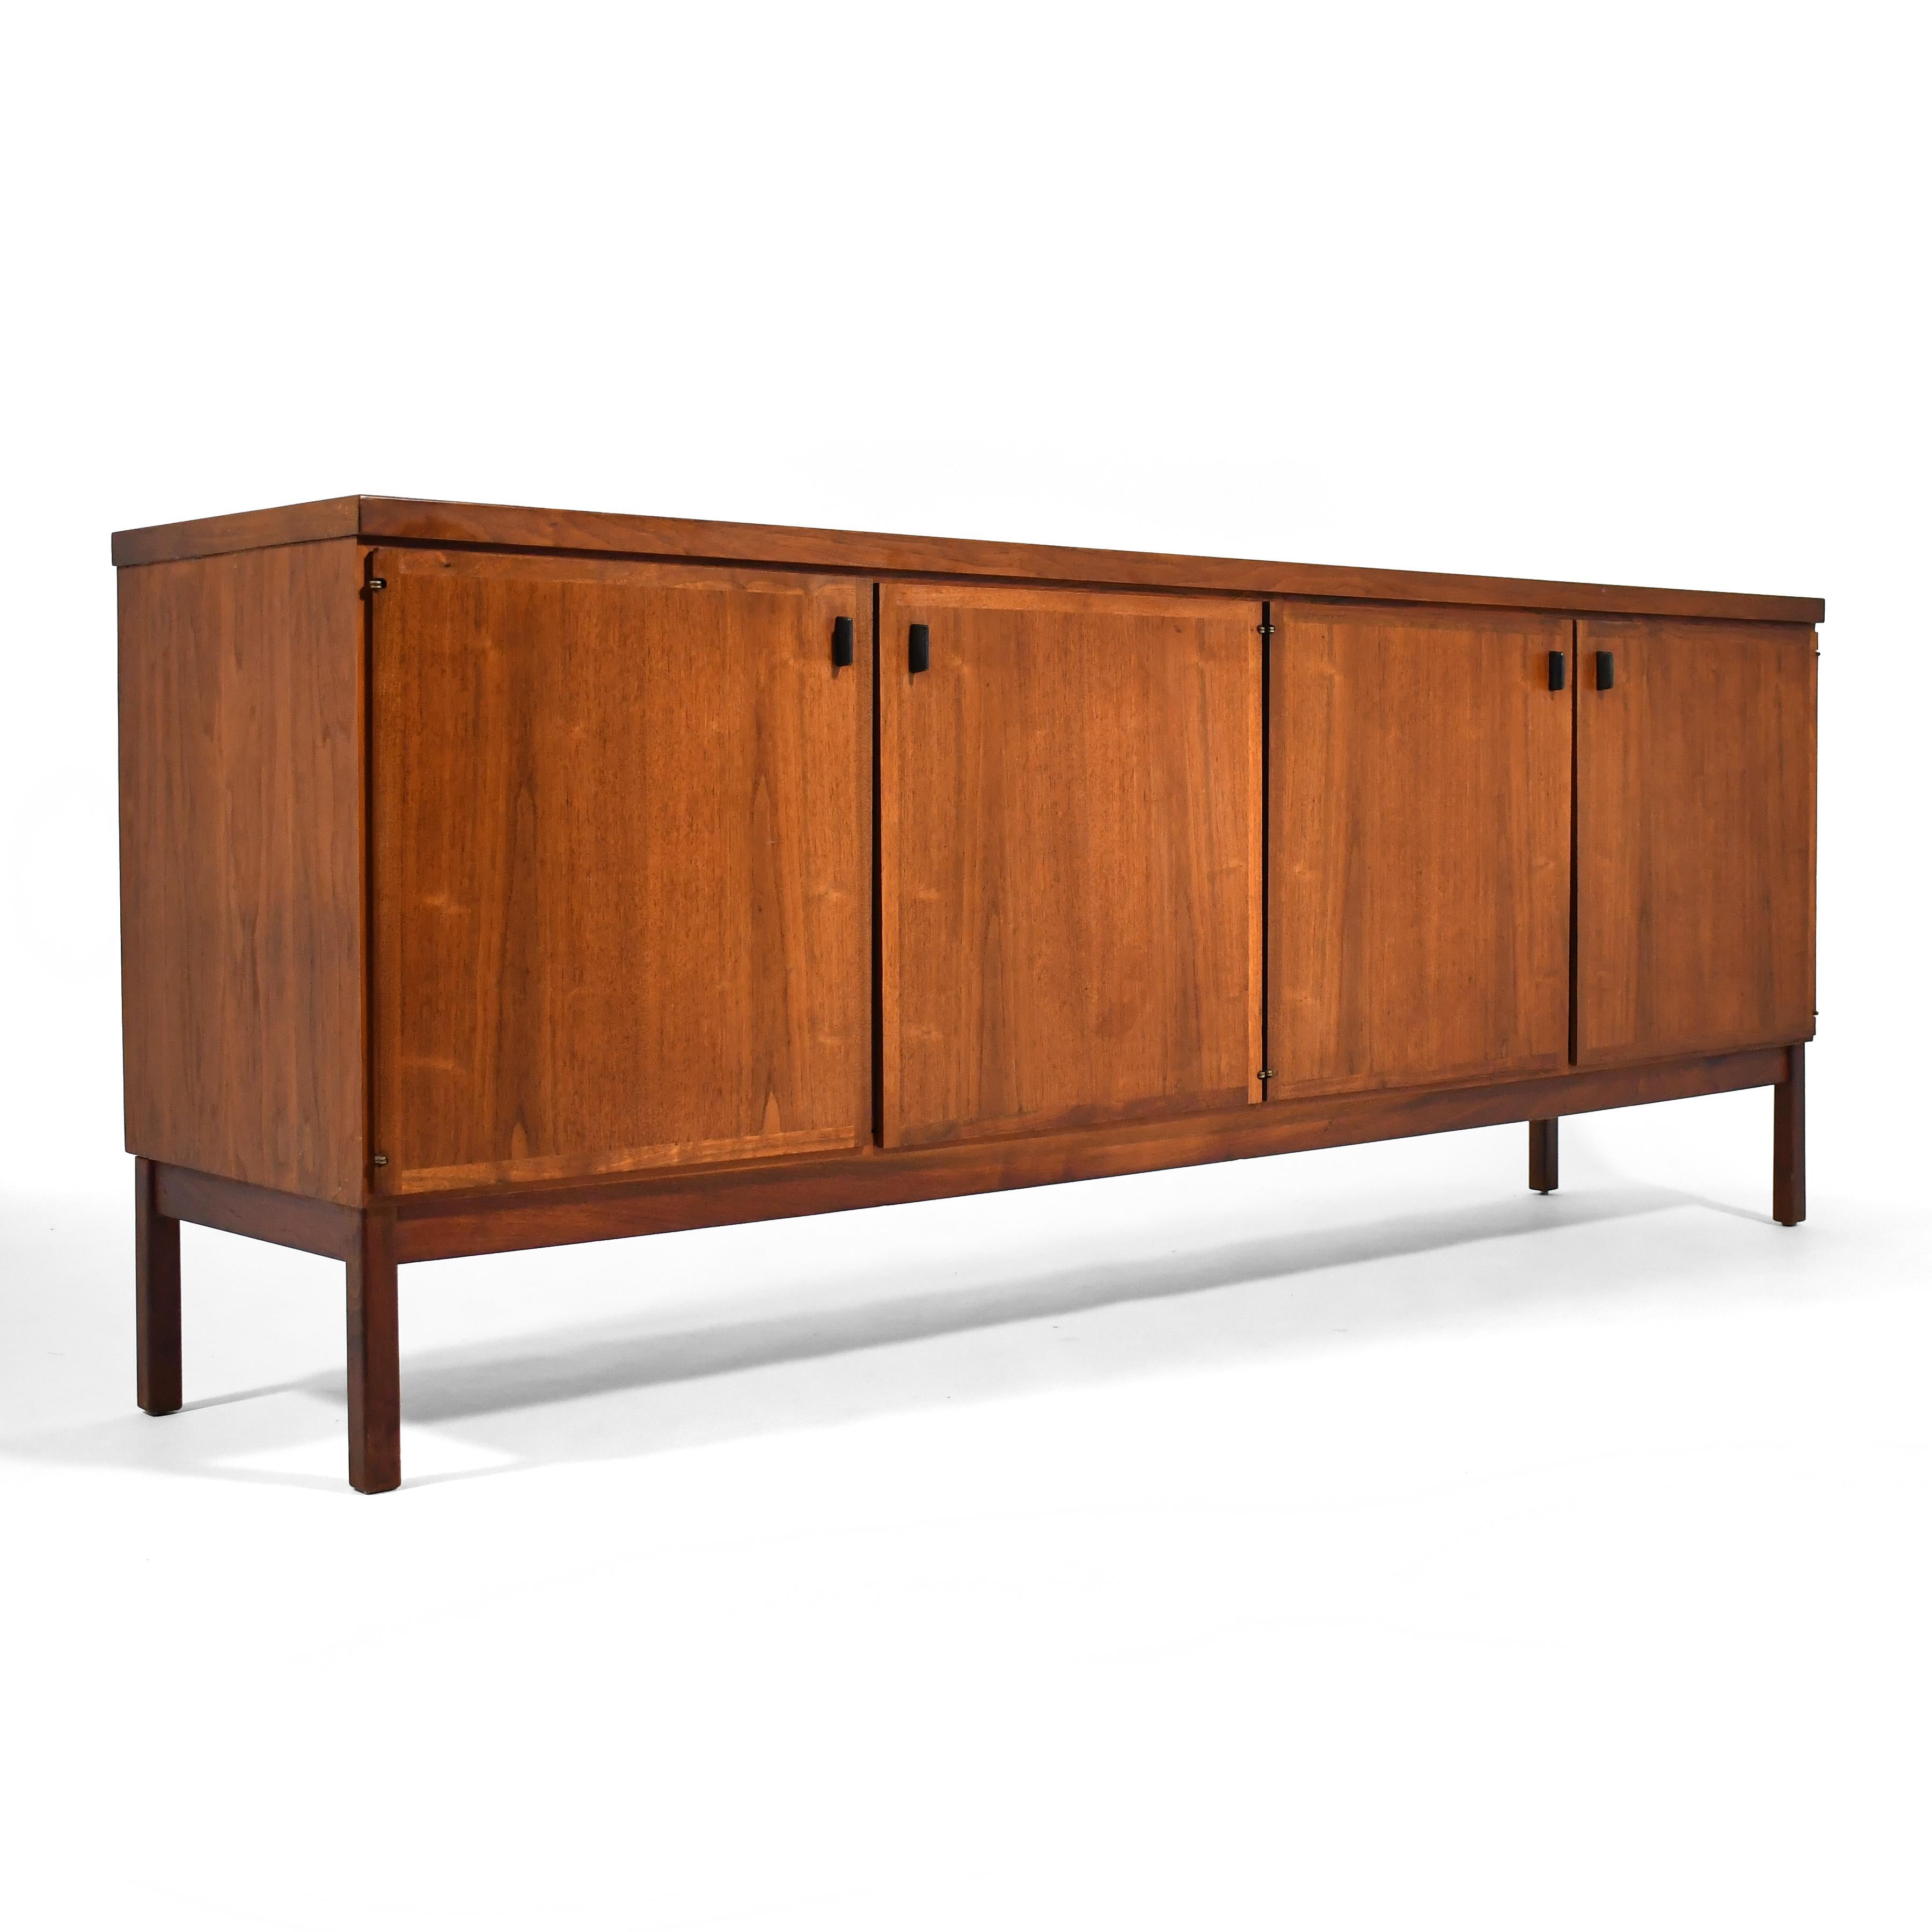 This handsome Jack Cartwright walnut credenza features two cabinets behind two doors each, one with a single adjustable shelf, the other with a silverware drawer and a linen drawer. Nicely detailed with a reveal between the top and the case, and